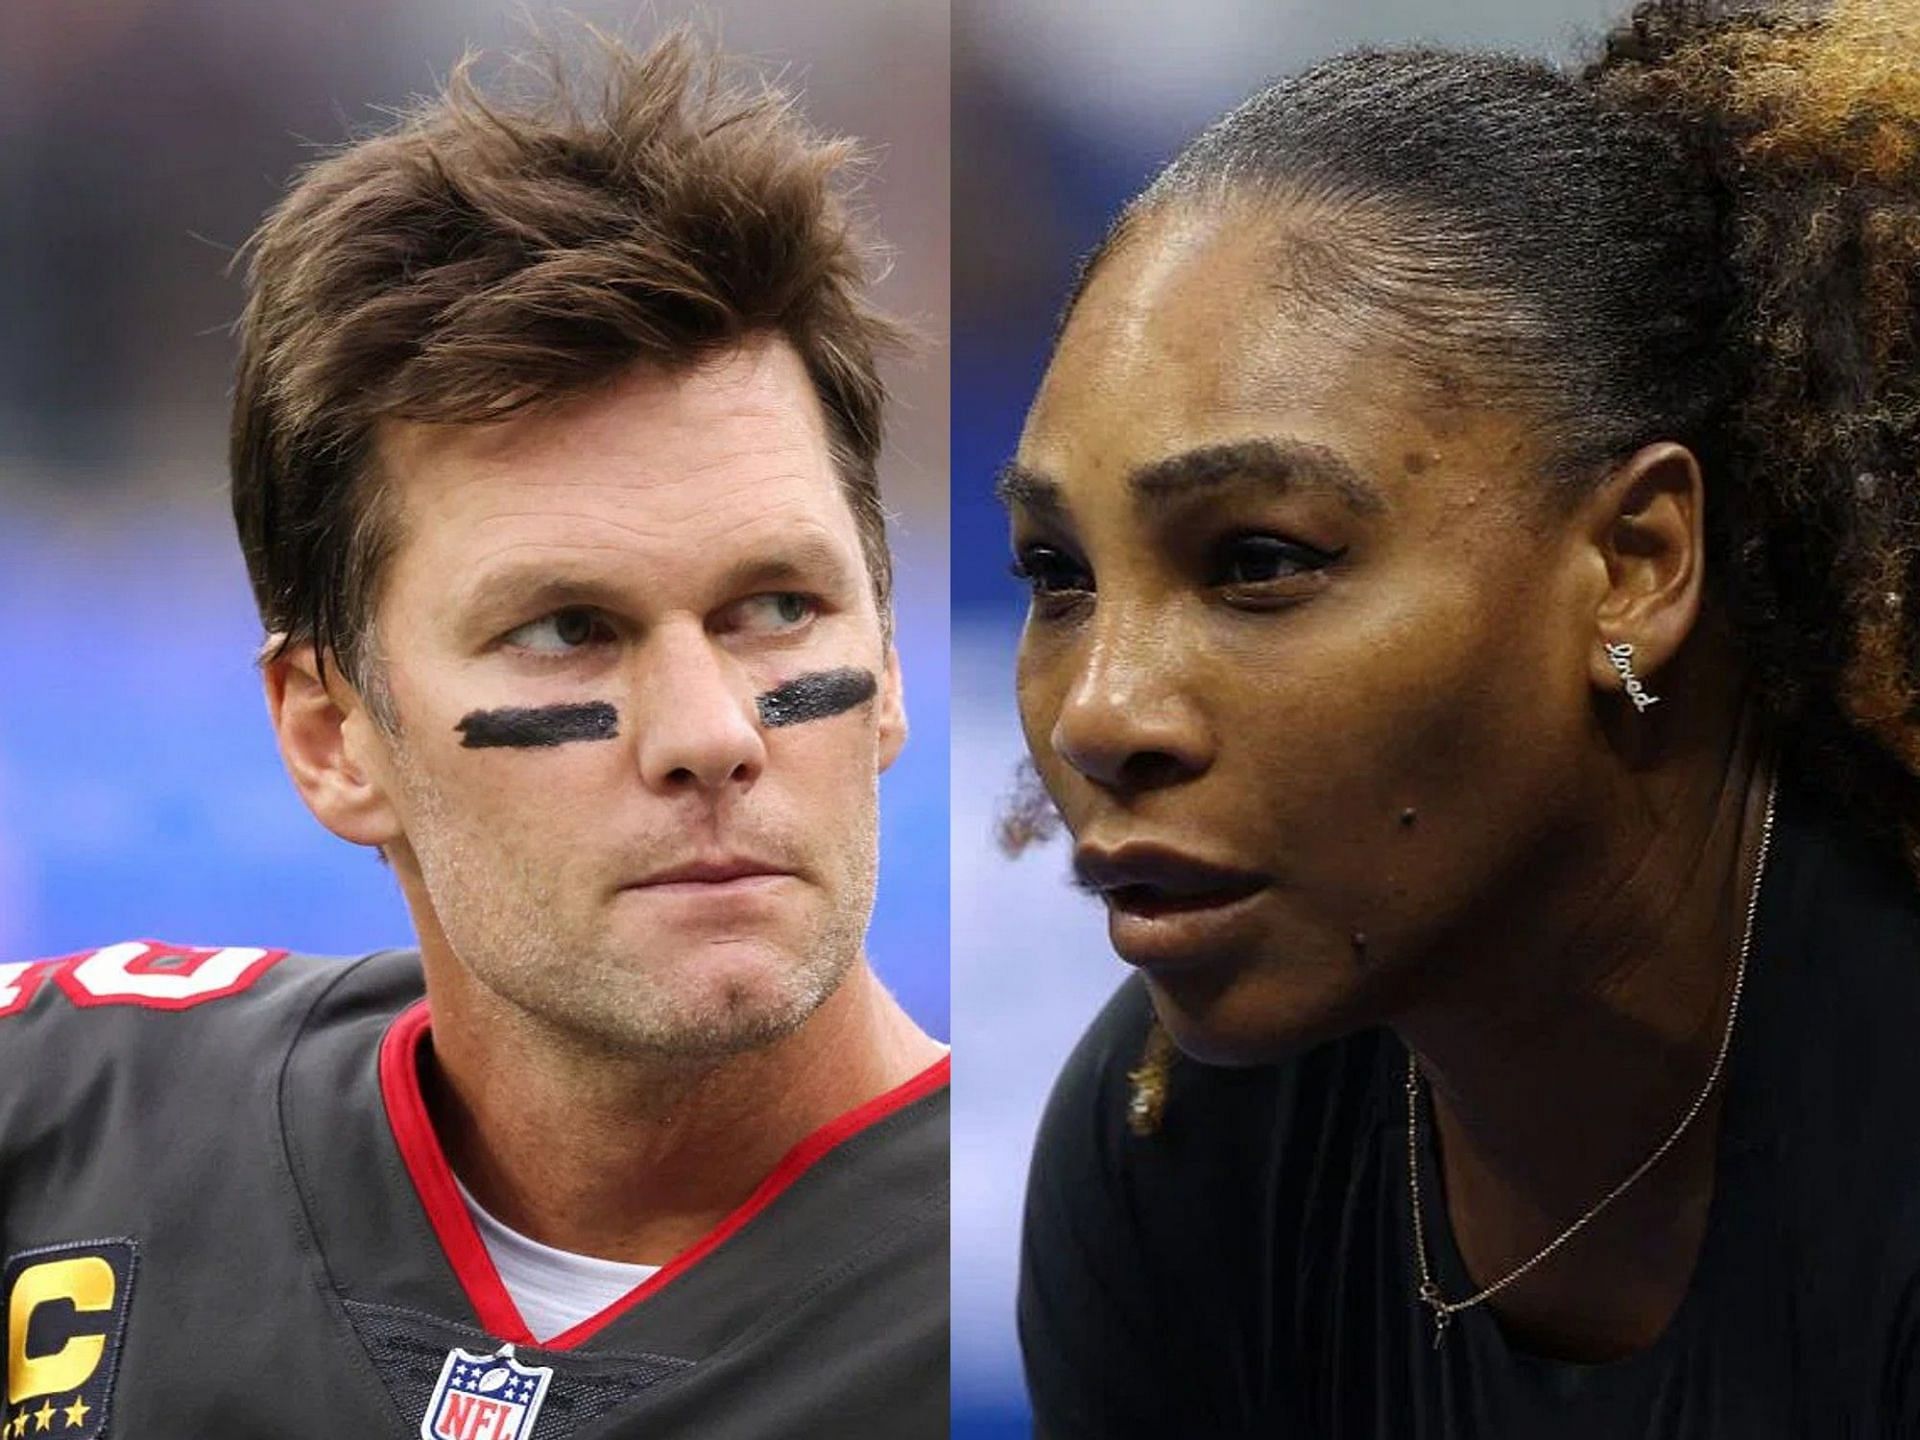 Serena Williams and Tom Brady are both the faces of their respective sports...